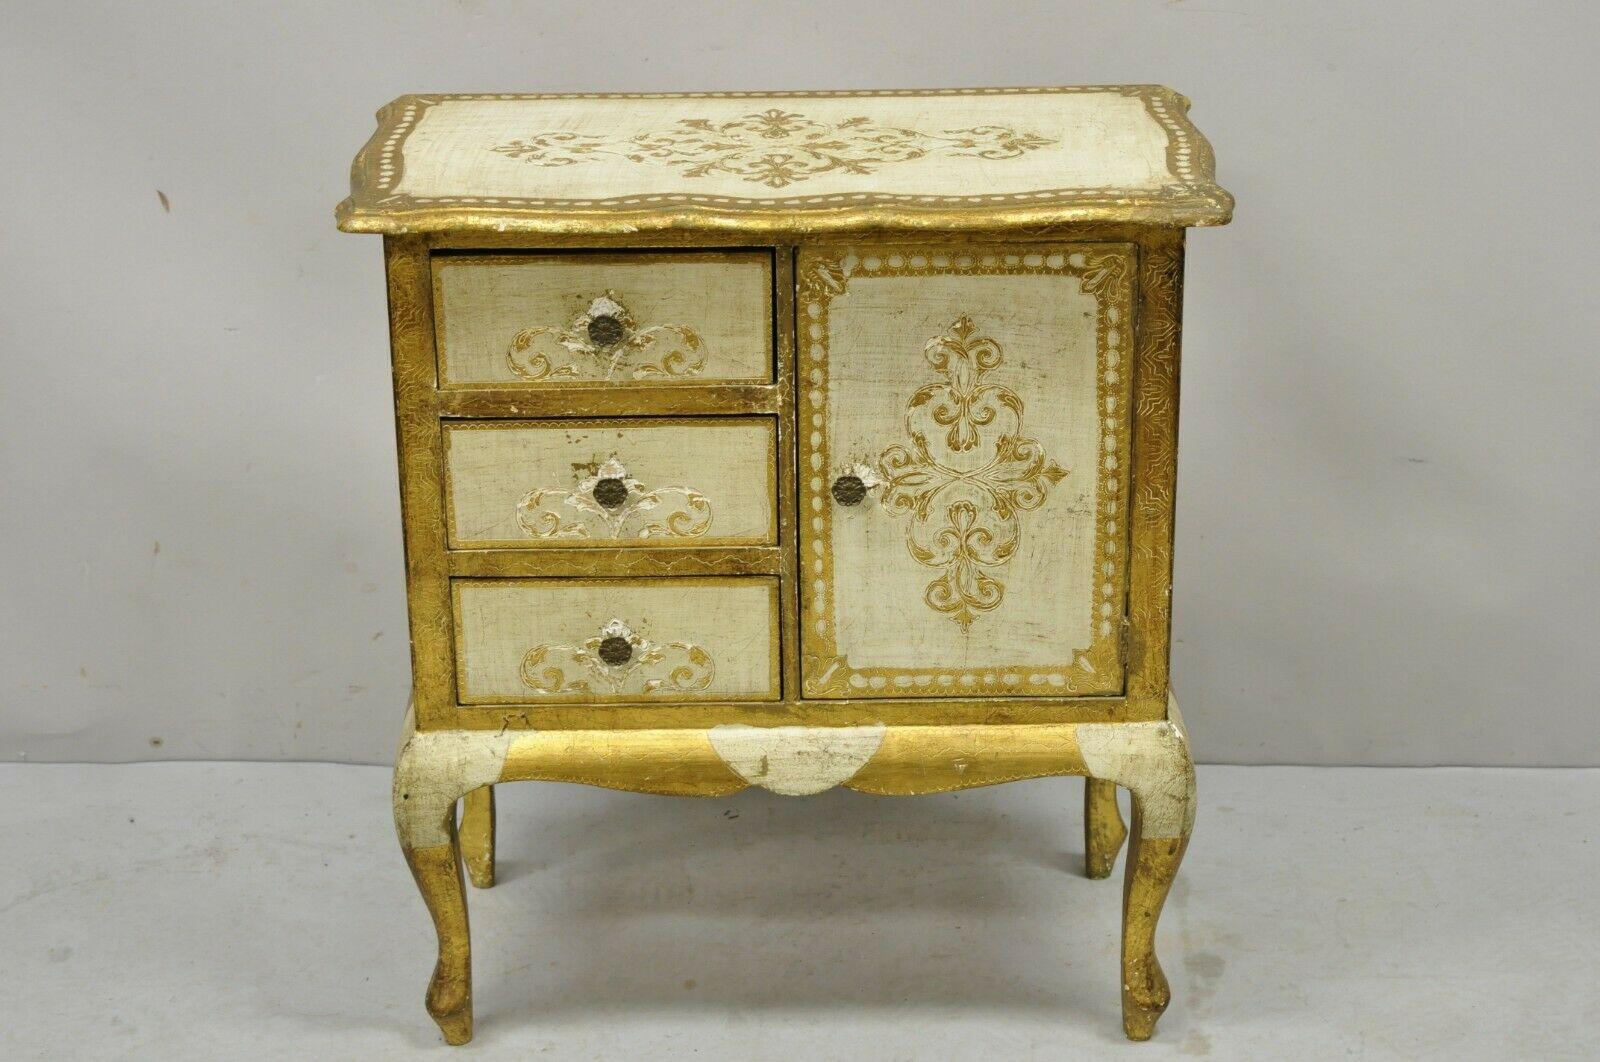 Vintage Italian florentine cream and gold small nightstand side table cabinet. Item features a gold gilt Florentine details, cream and gold painted finish, nice small size, 1 swing door, 3 drawers. Circa mid-20th century. Measurements: 27.5